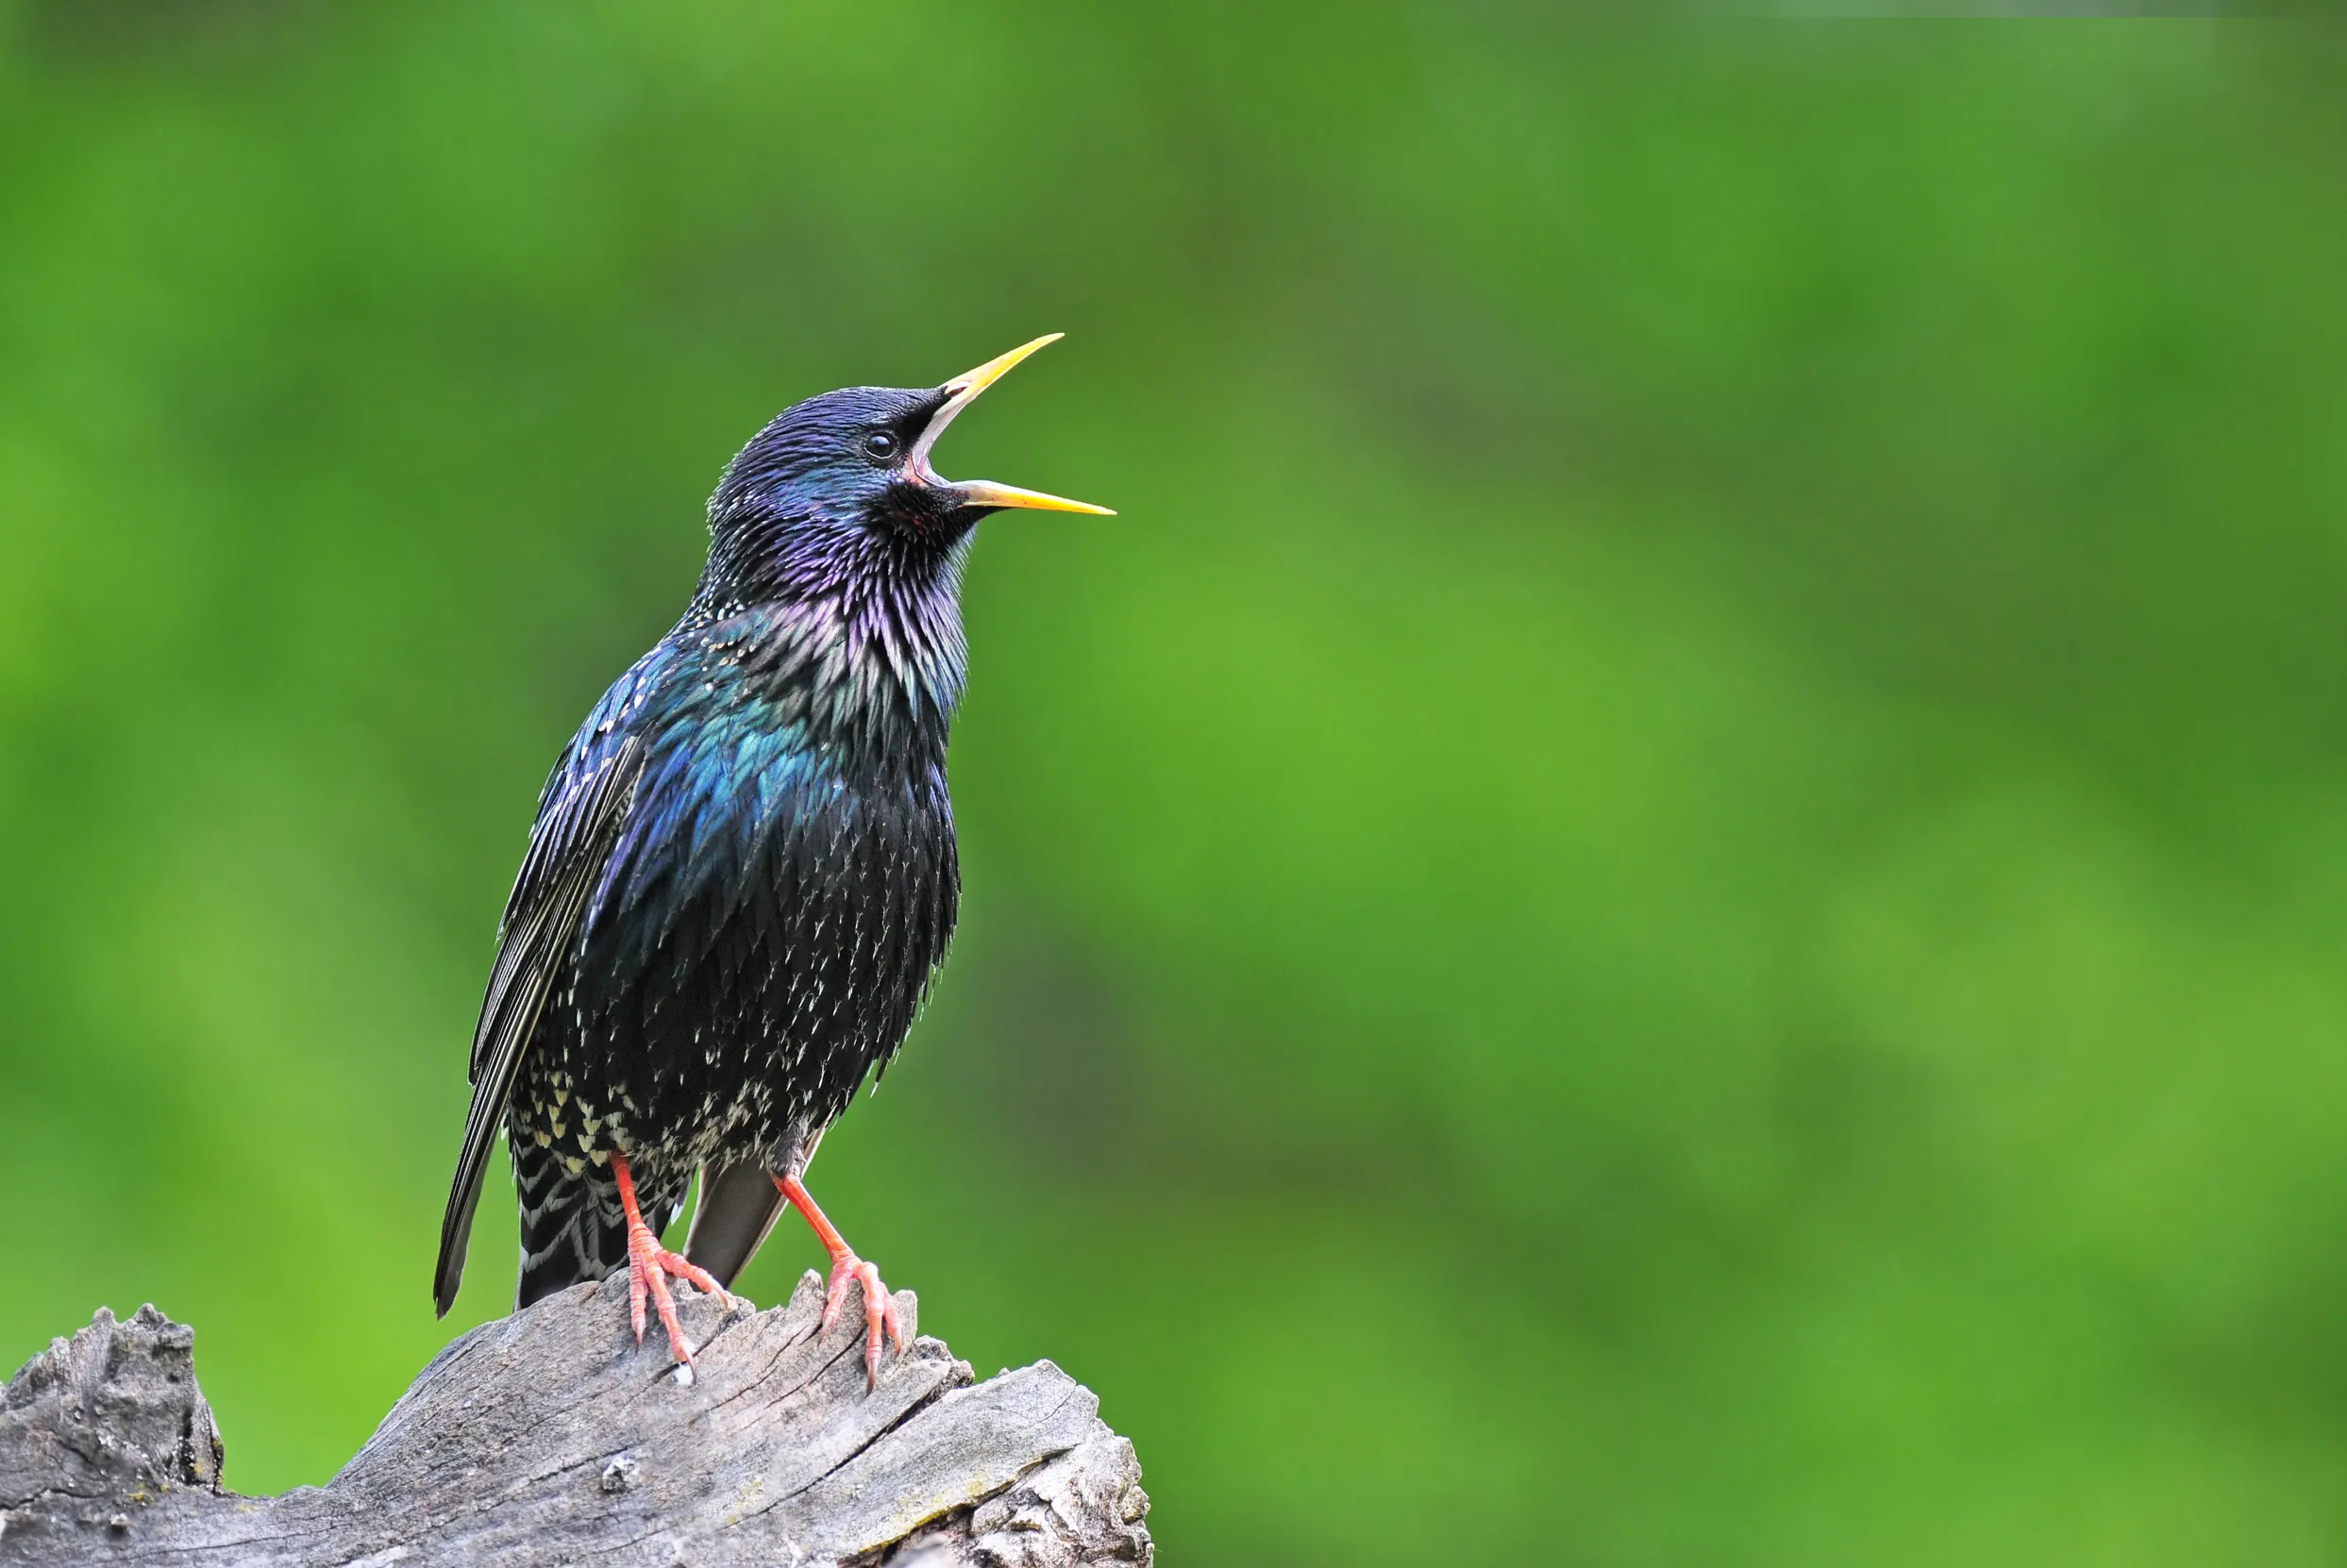 A Starling perched on a log singing.